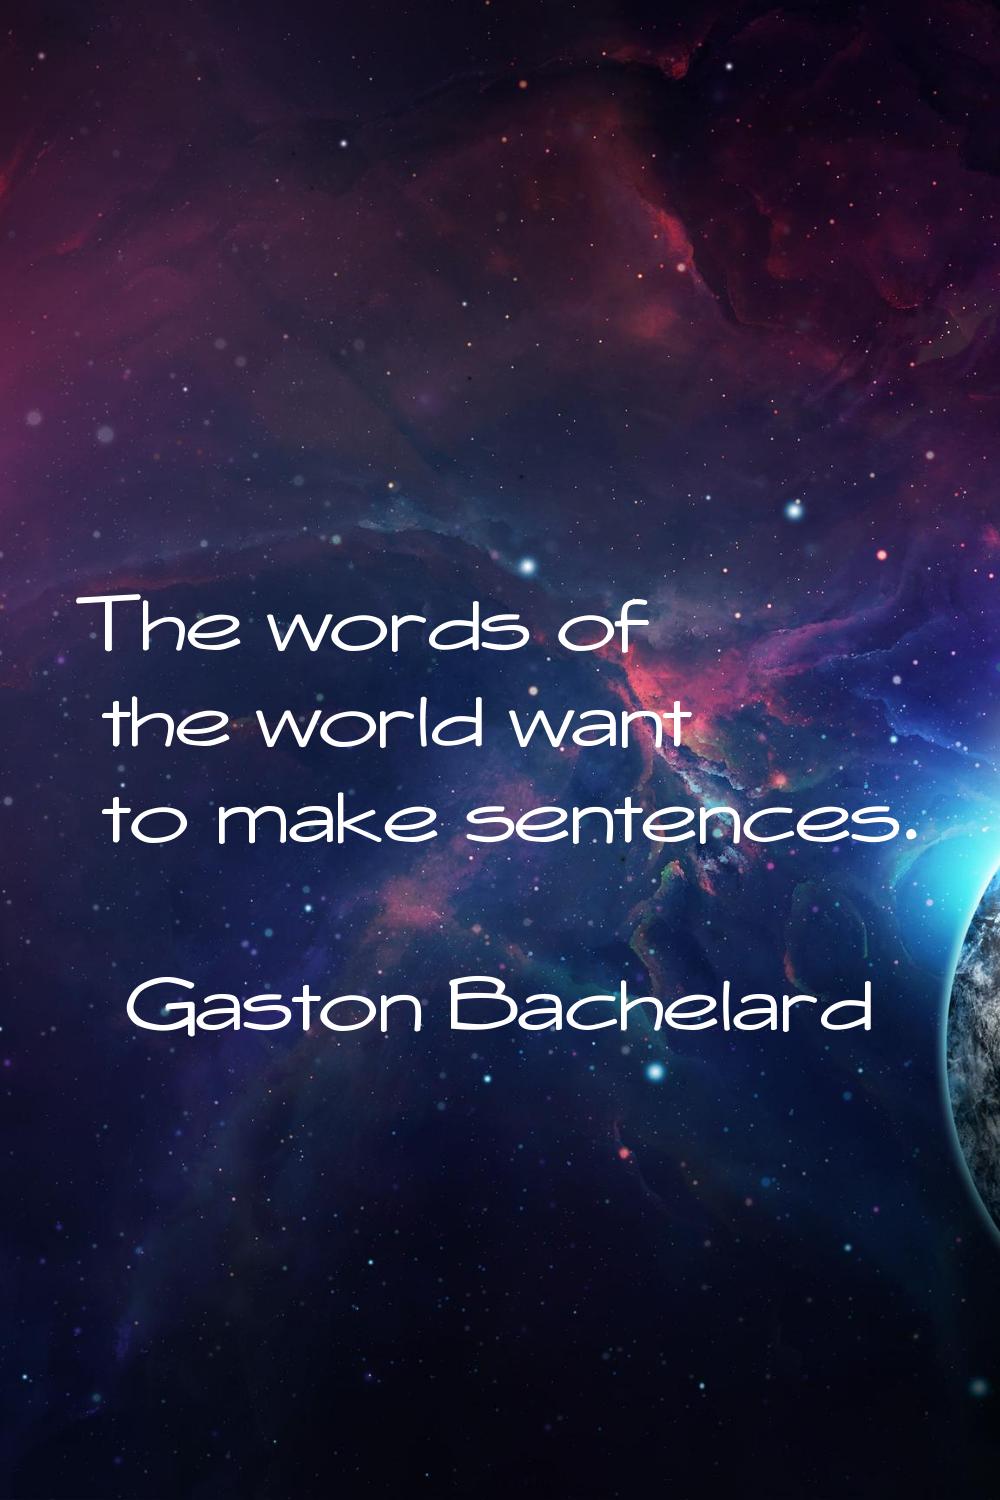 The words of the world want to make sentences.